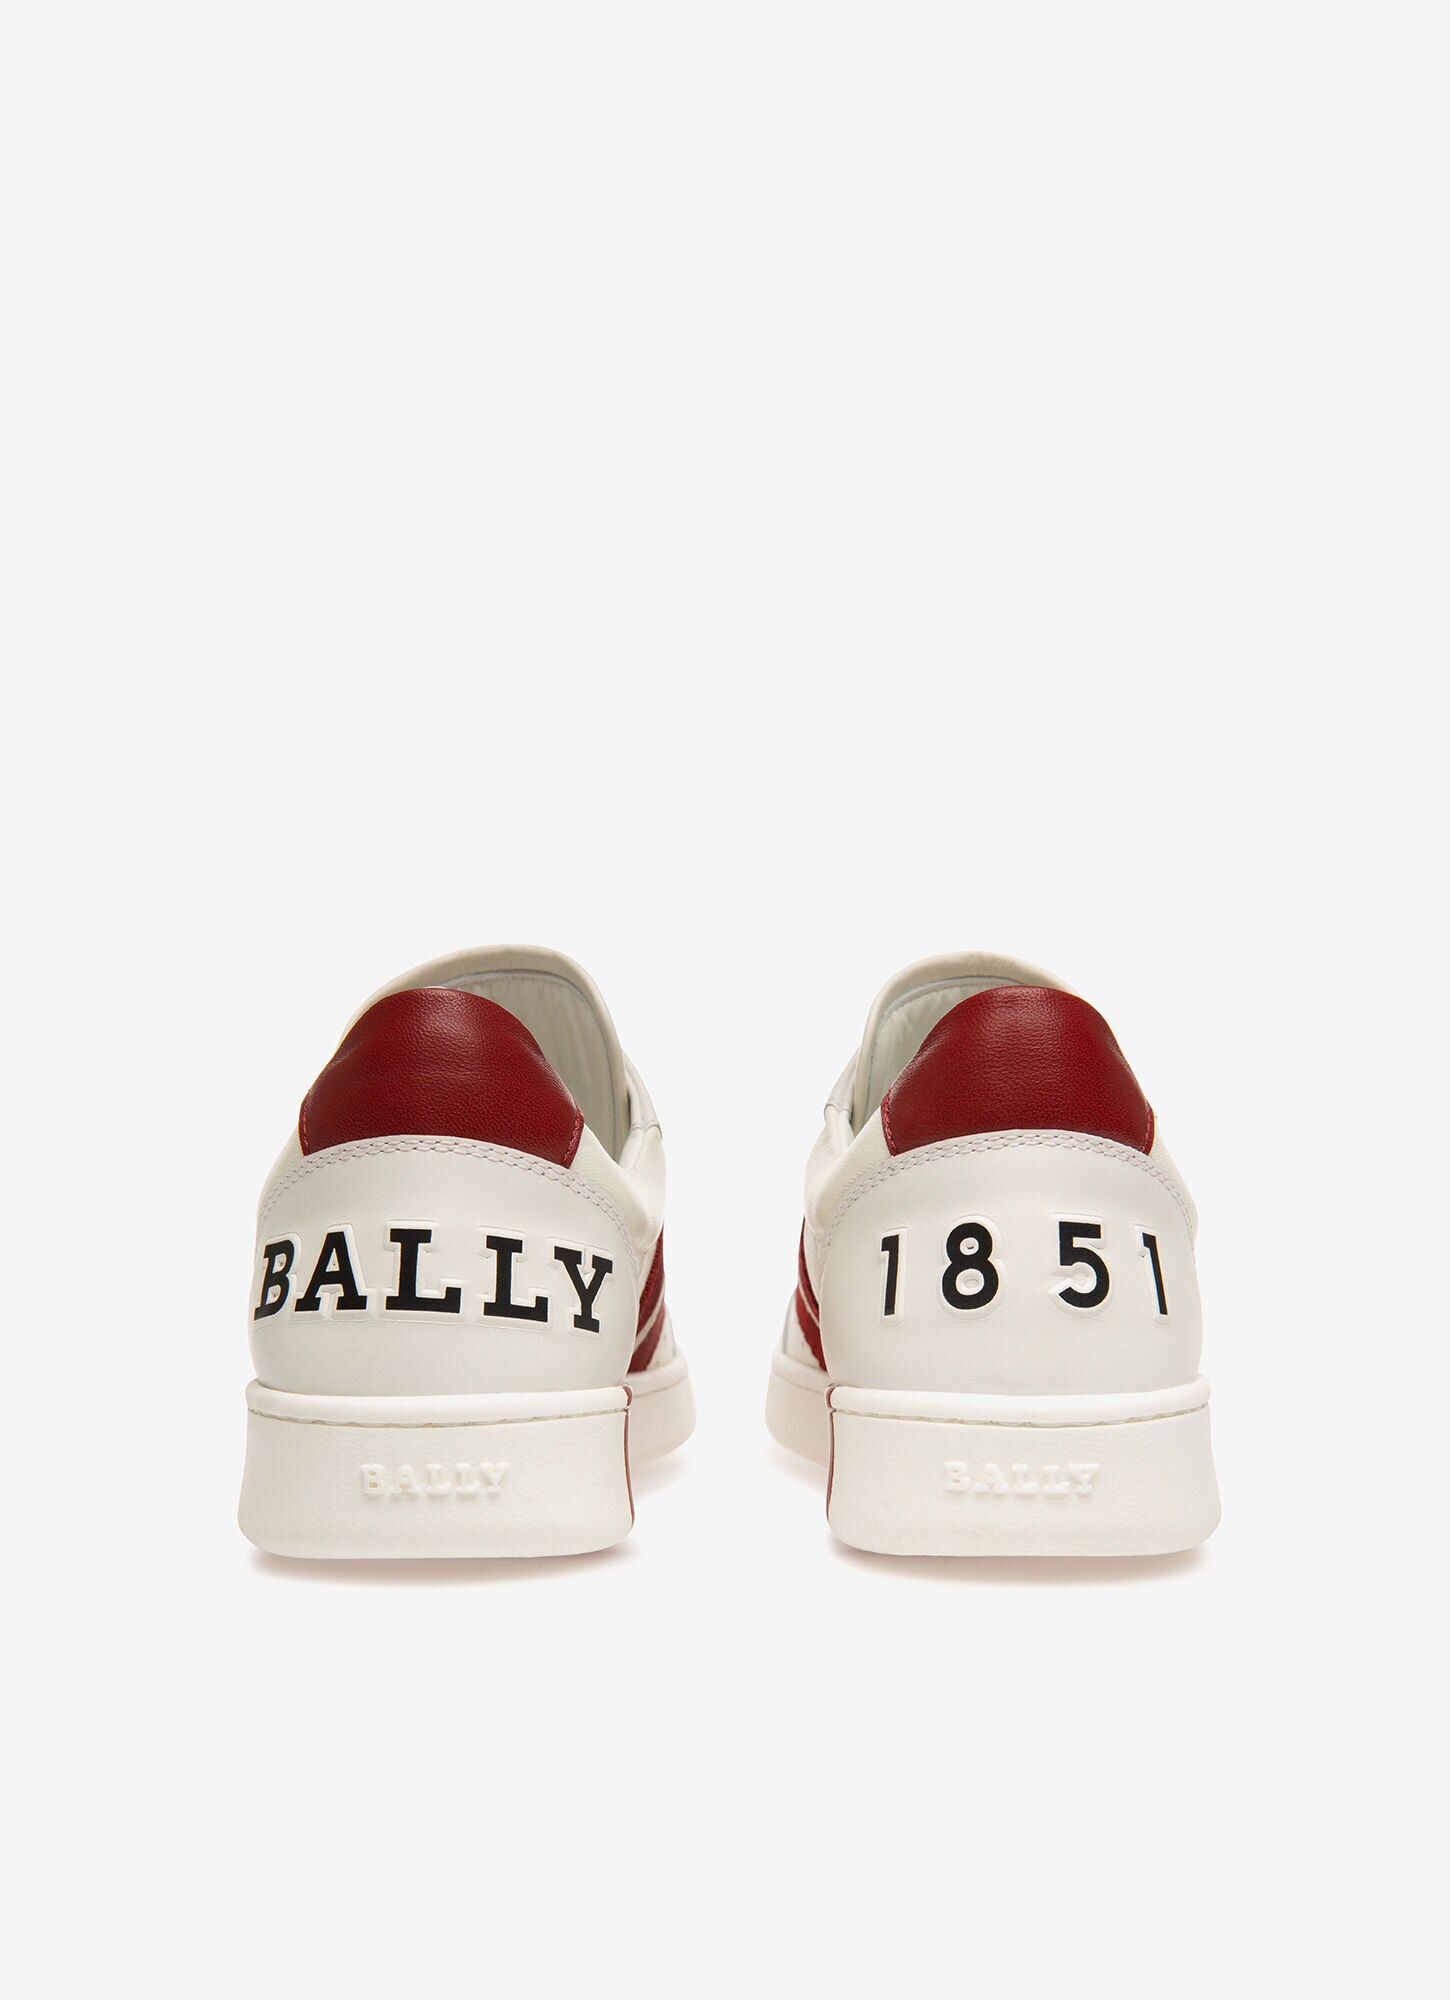 bally sneakers